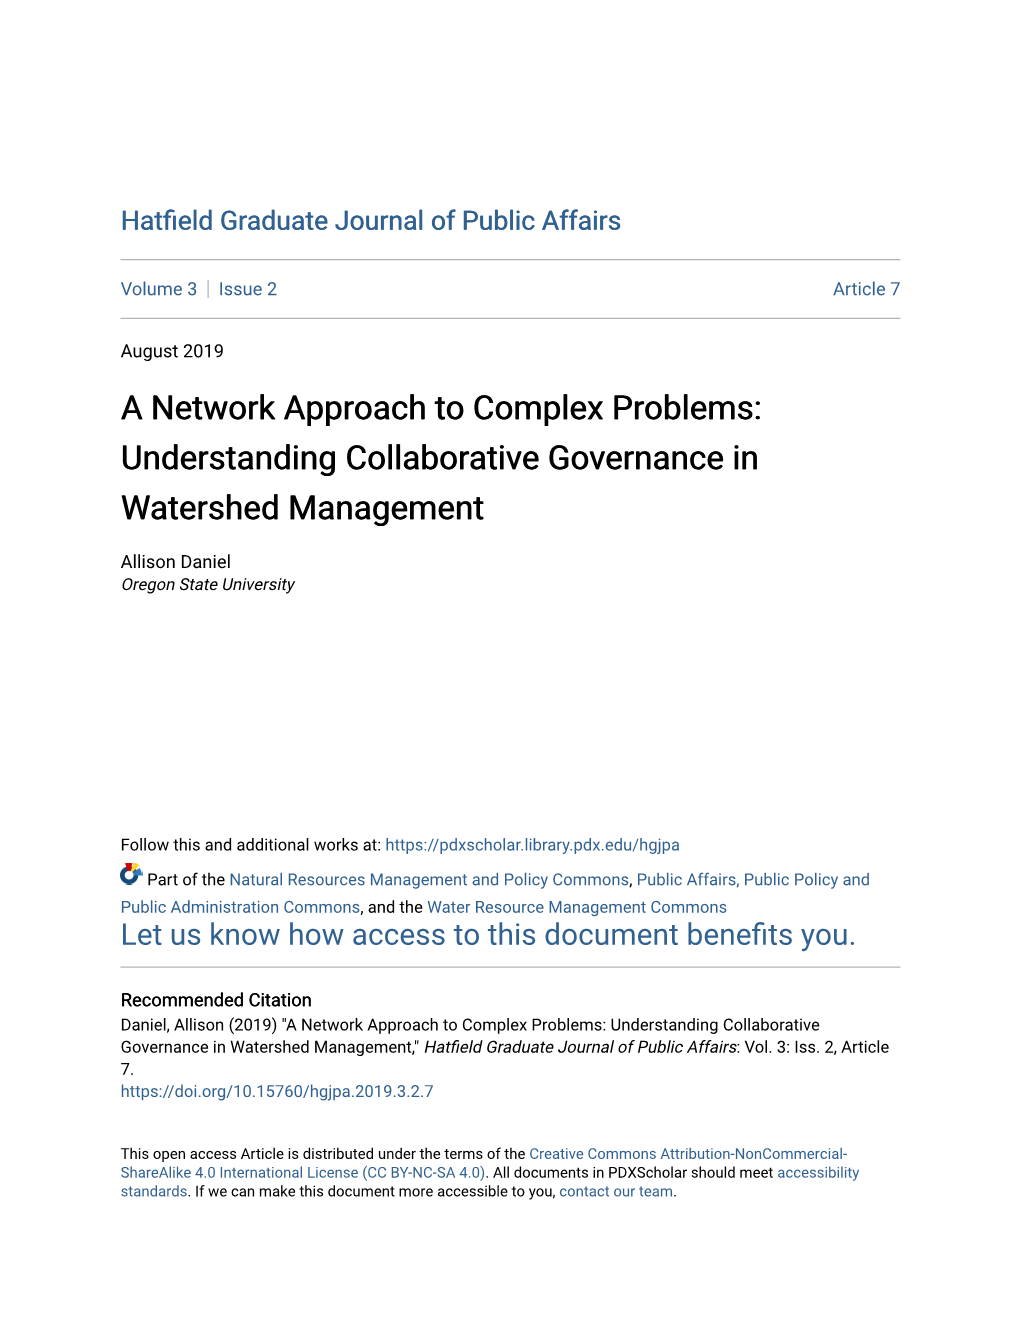 A Network Approach to Complex Problems: Understanding Collaborative Governance in Watershed Management